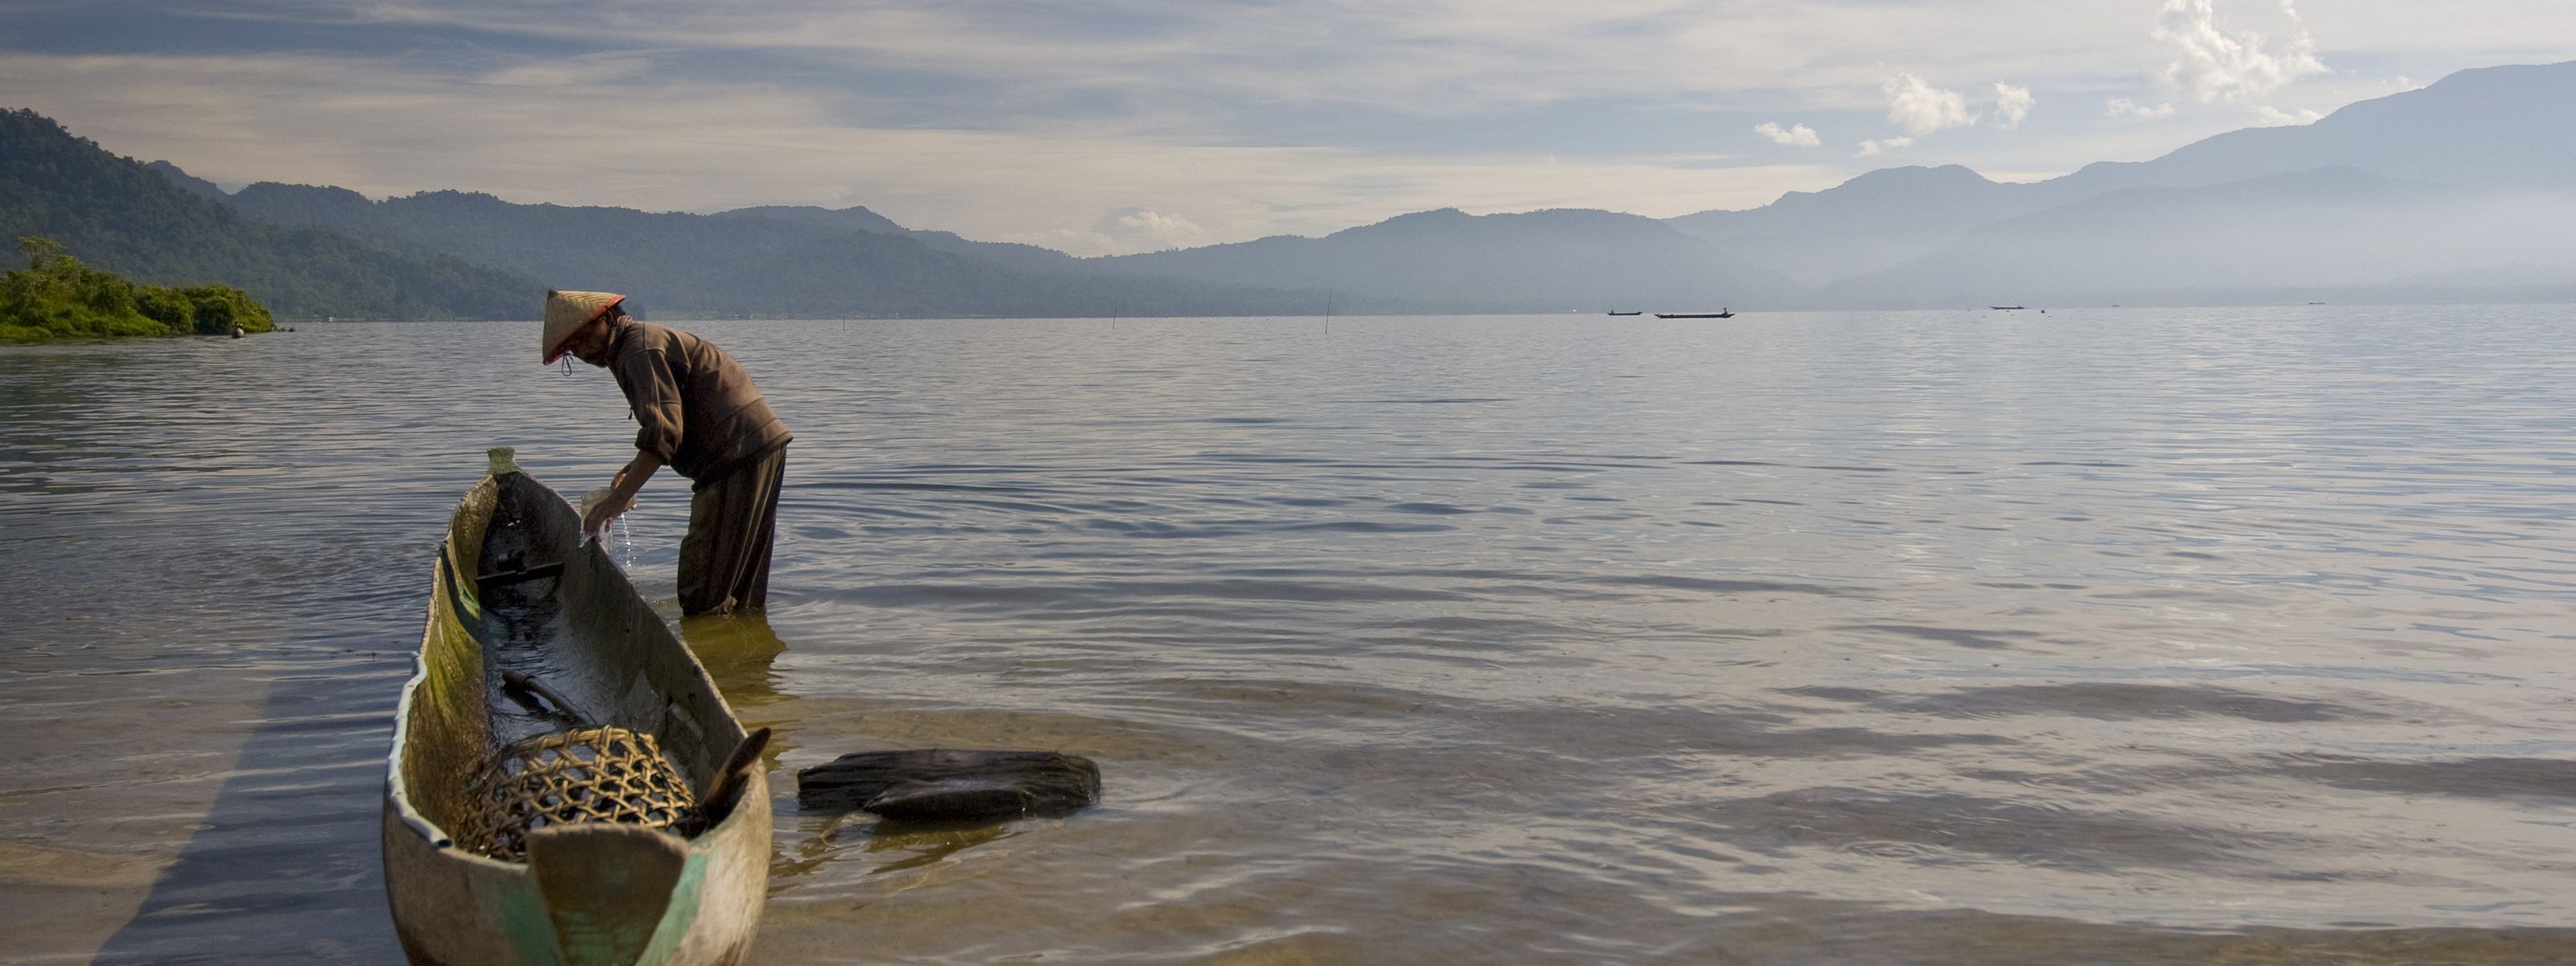 A man stands in knee-deep water next to a dugout canoe; mountains surround the lake in the distance.